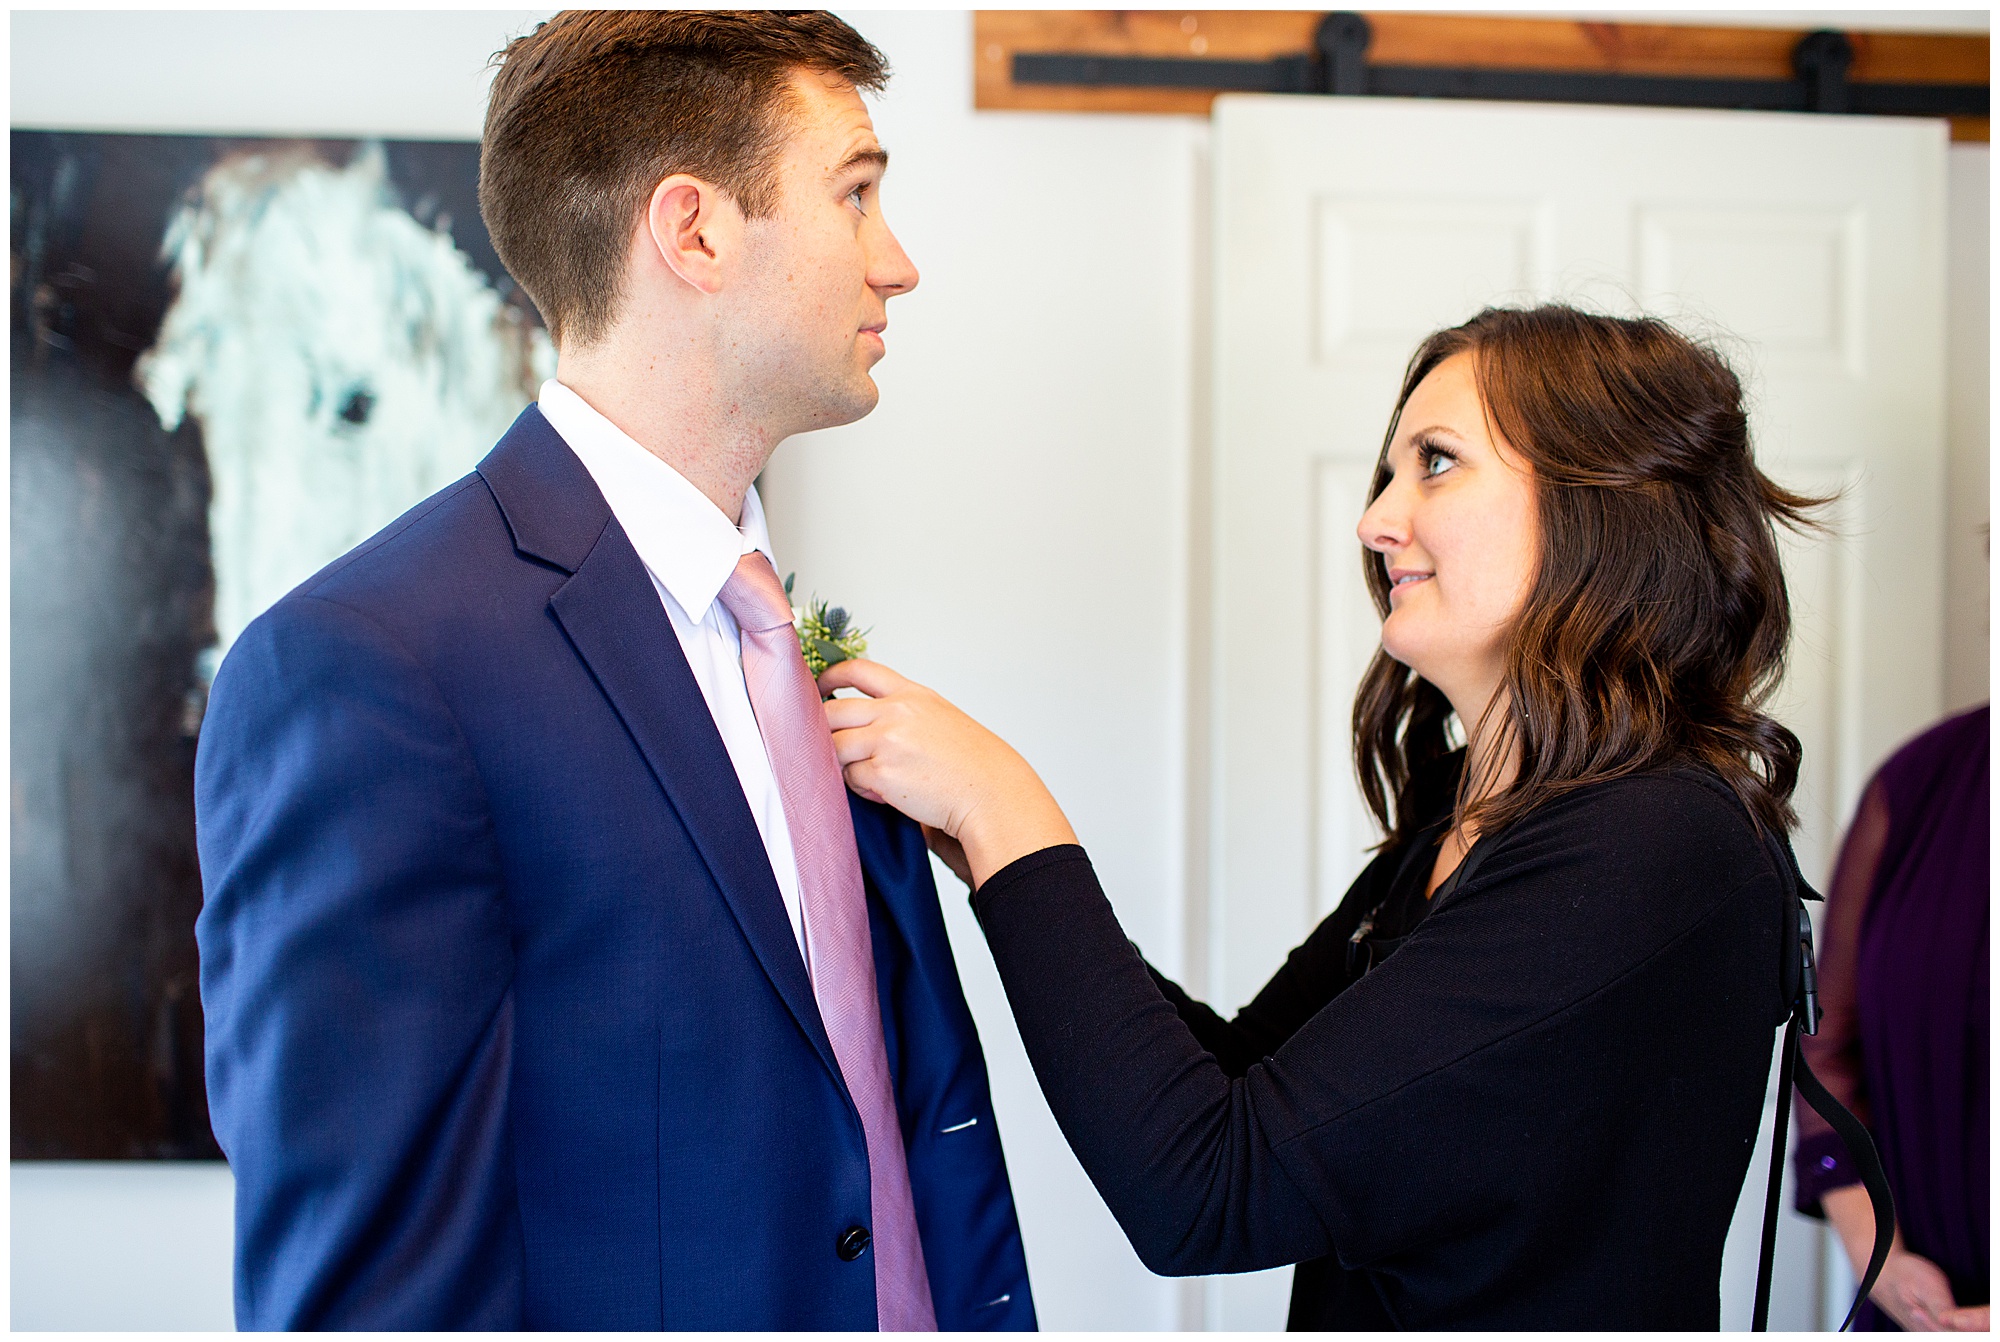 Have you seen a groom's pants split during a reception? Find out more behind the scenes of 2019 weddings and sessions with Eleanor Stenner Photography!